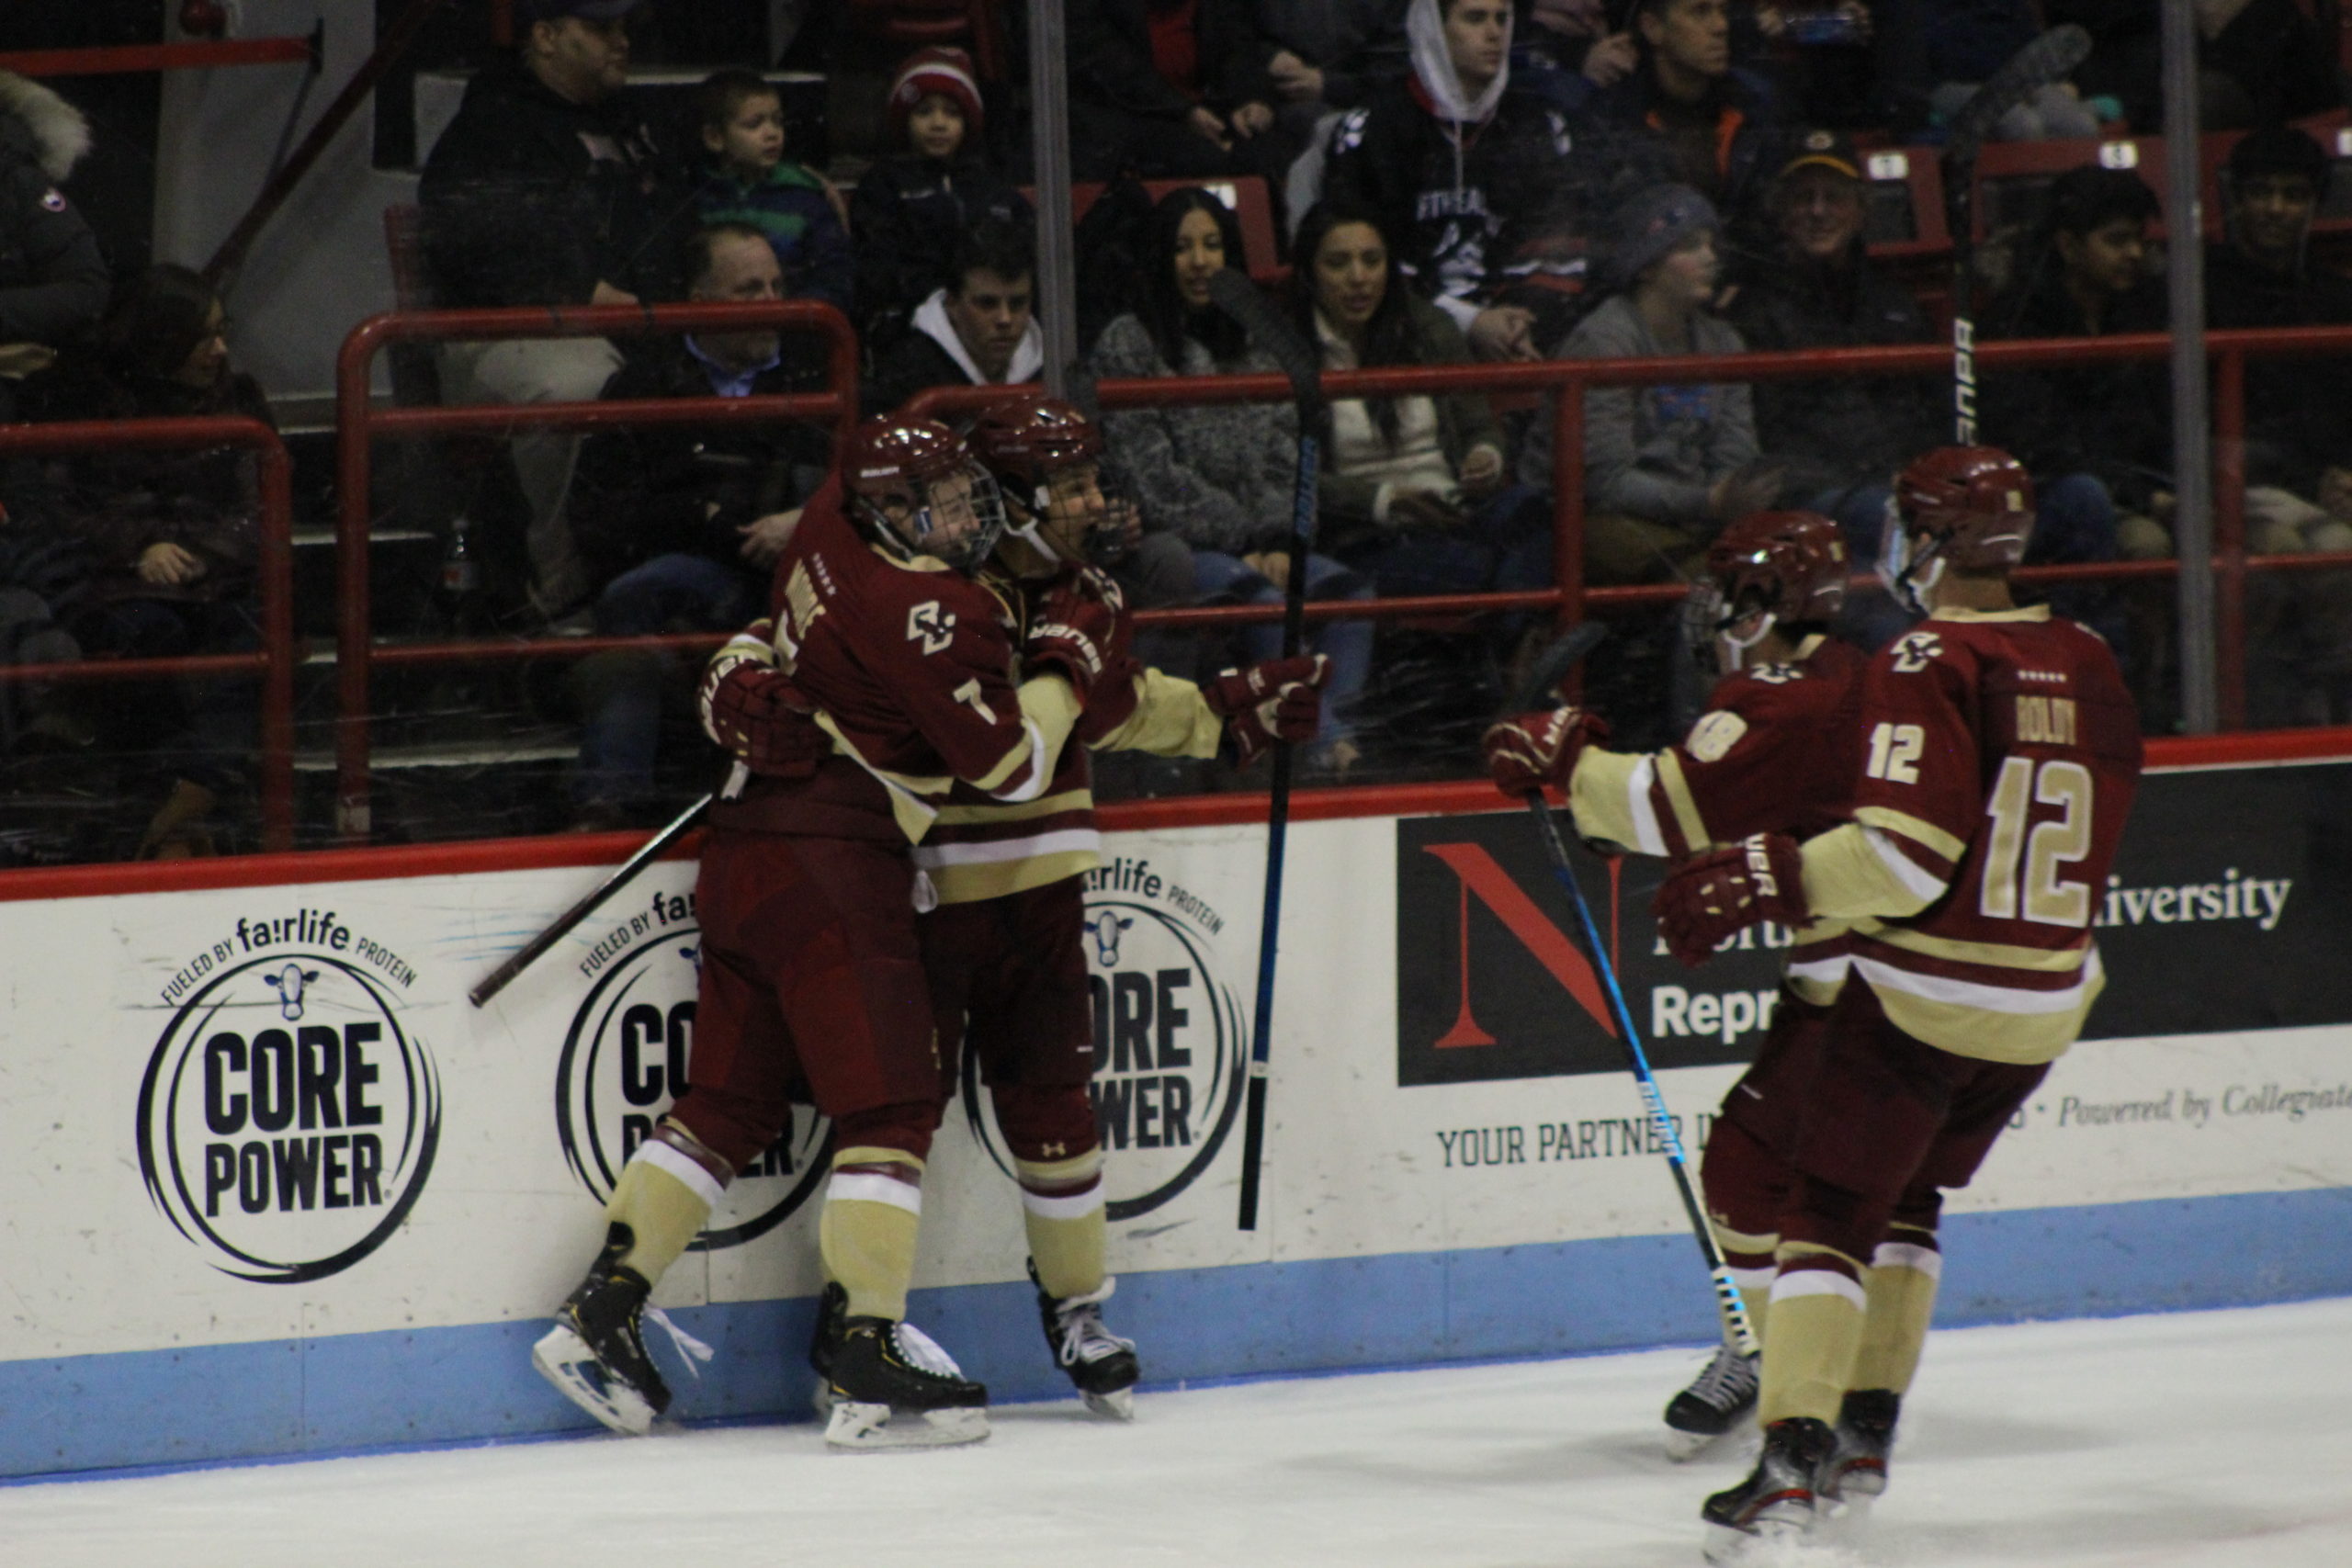 #5 Boston College Bests #10 Northeastern on Strong 2nd Period Effort